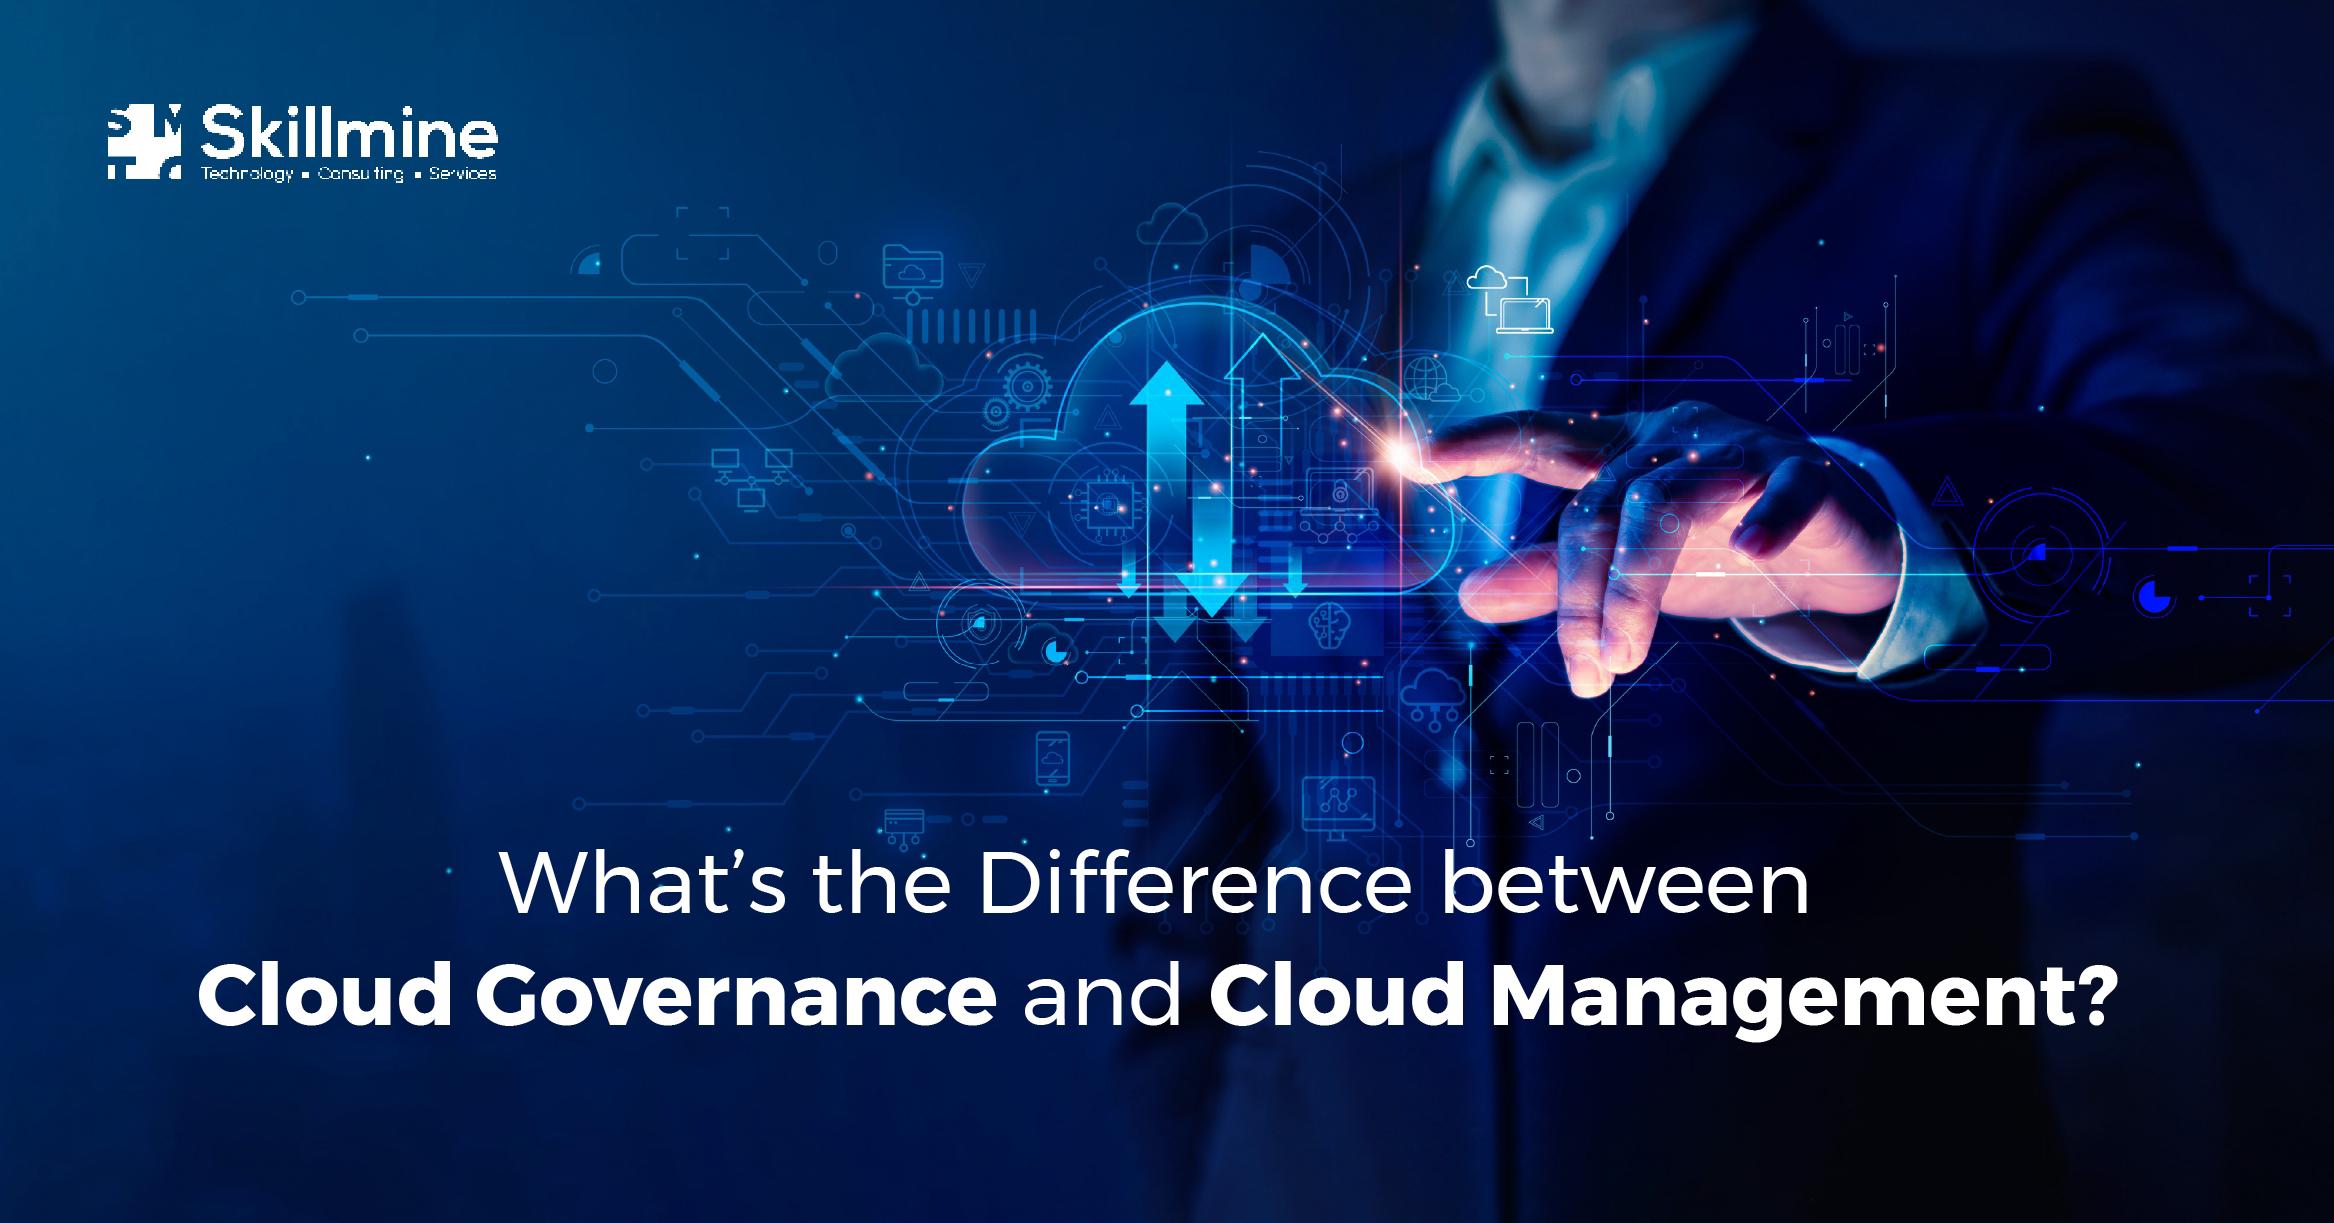 What’s the Difference between Cloud Governance and Cloud Management